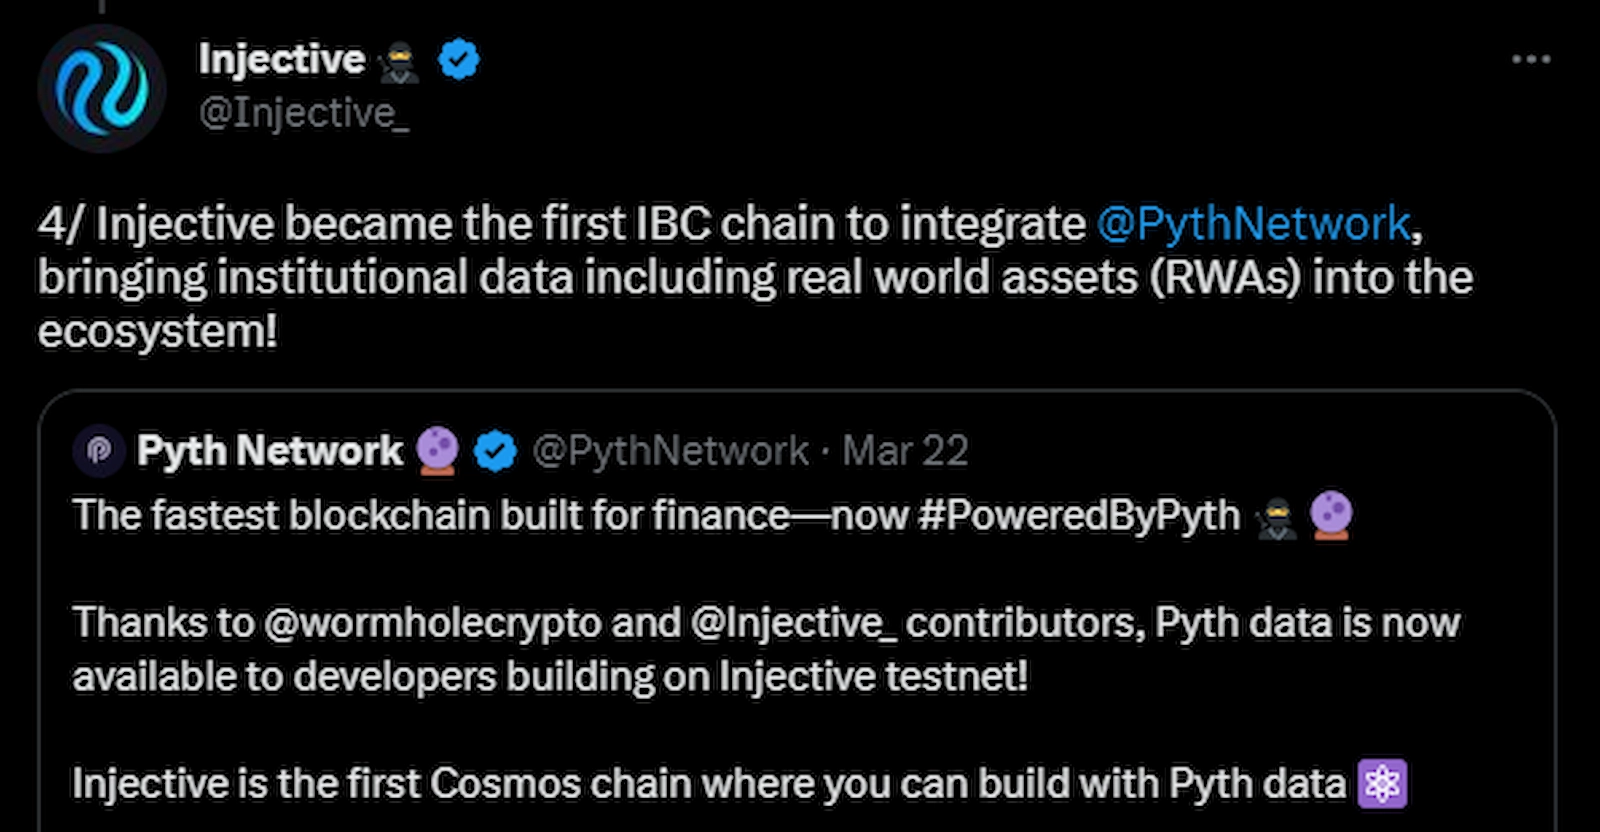 Injective became the first chain to integrate the Pyth Network